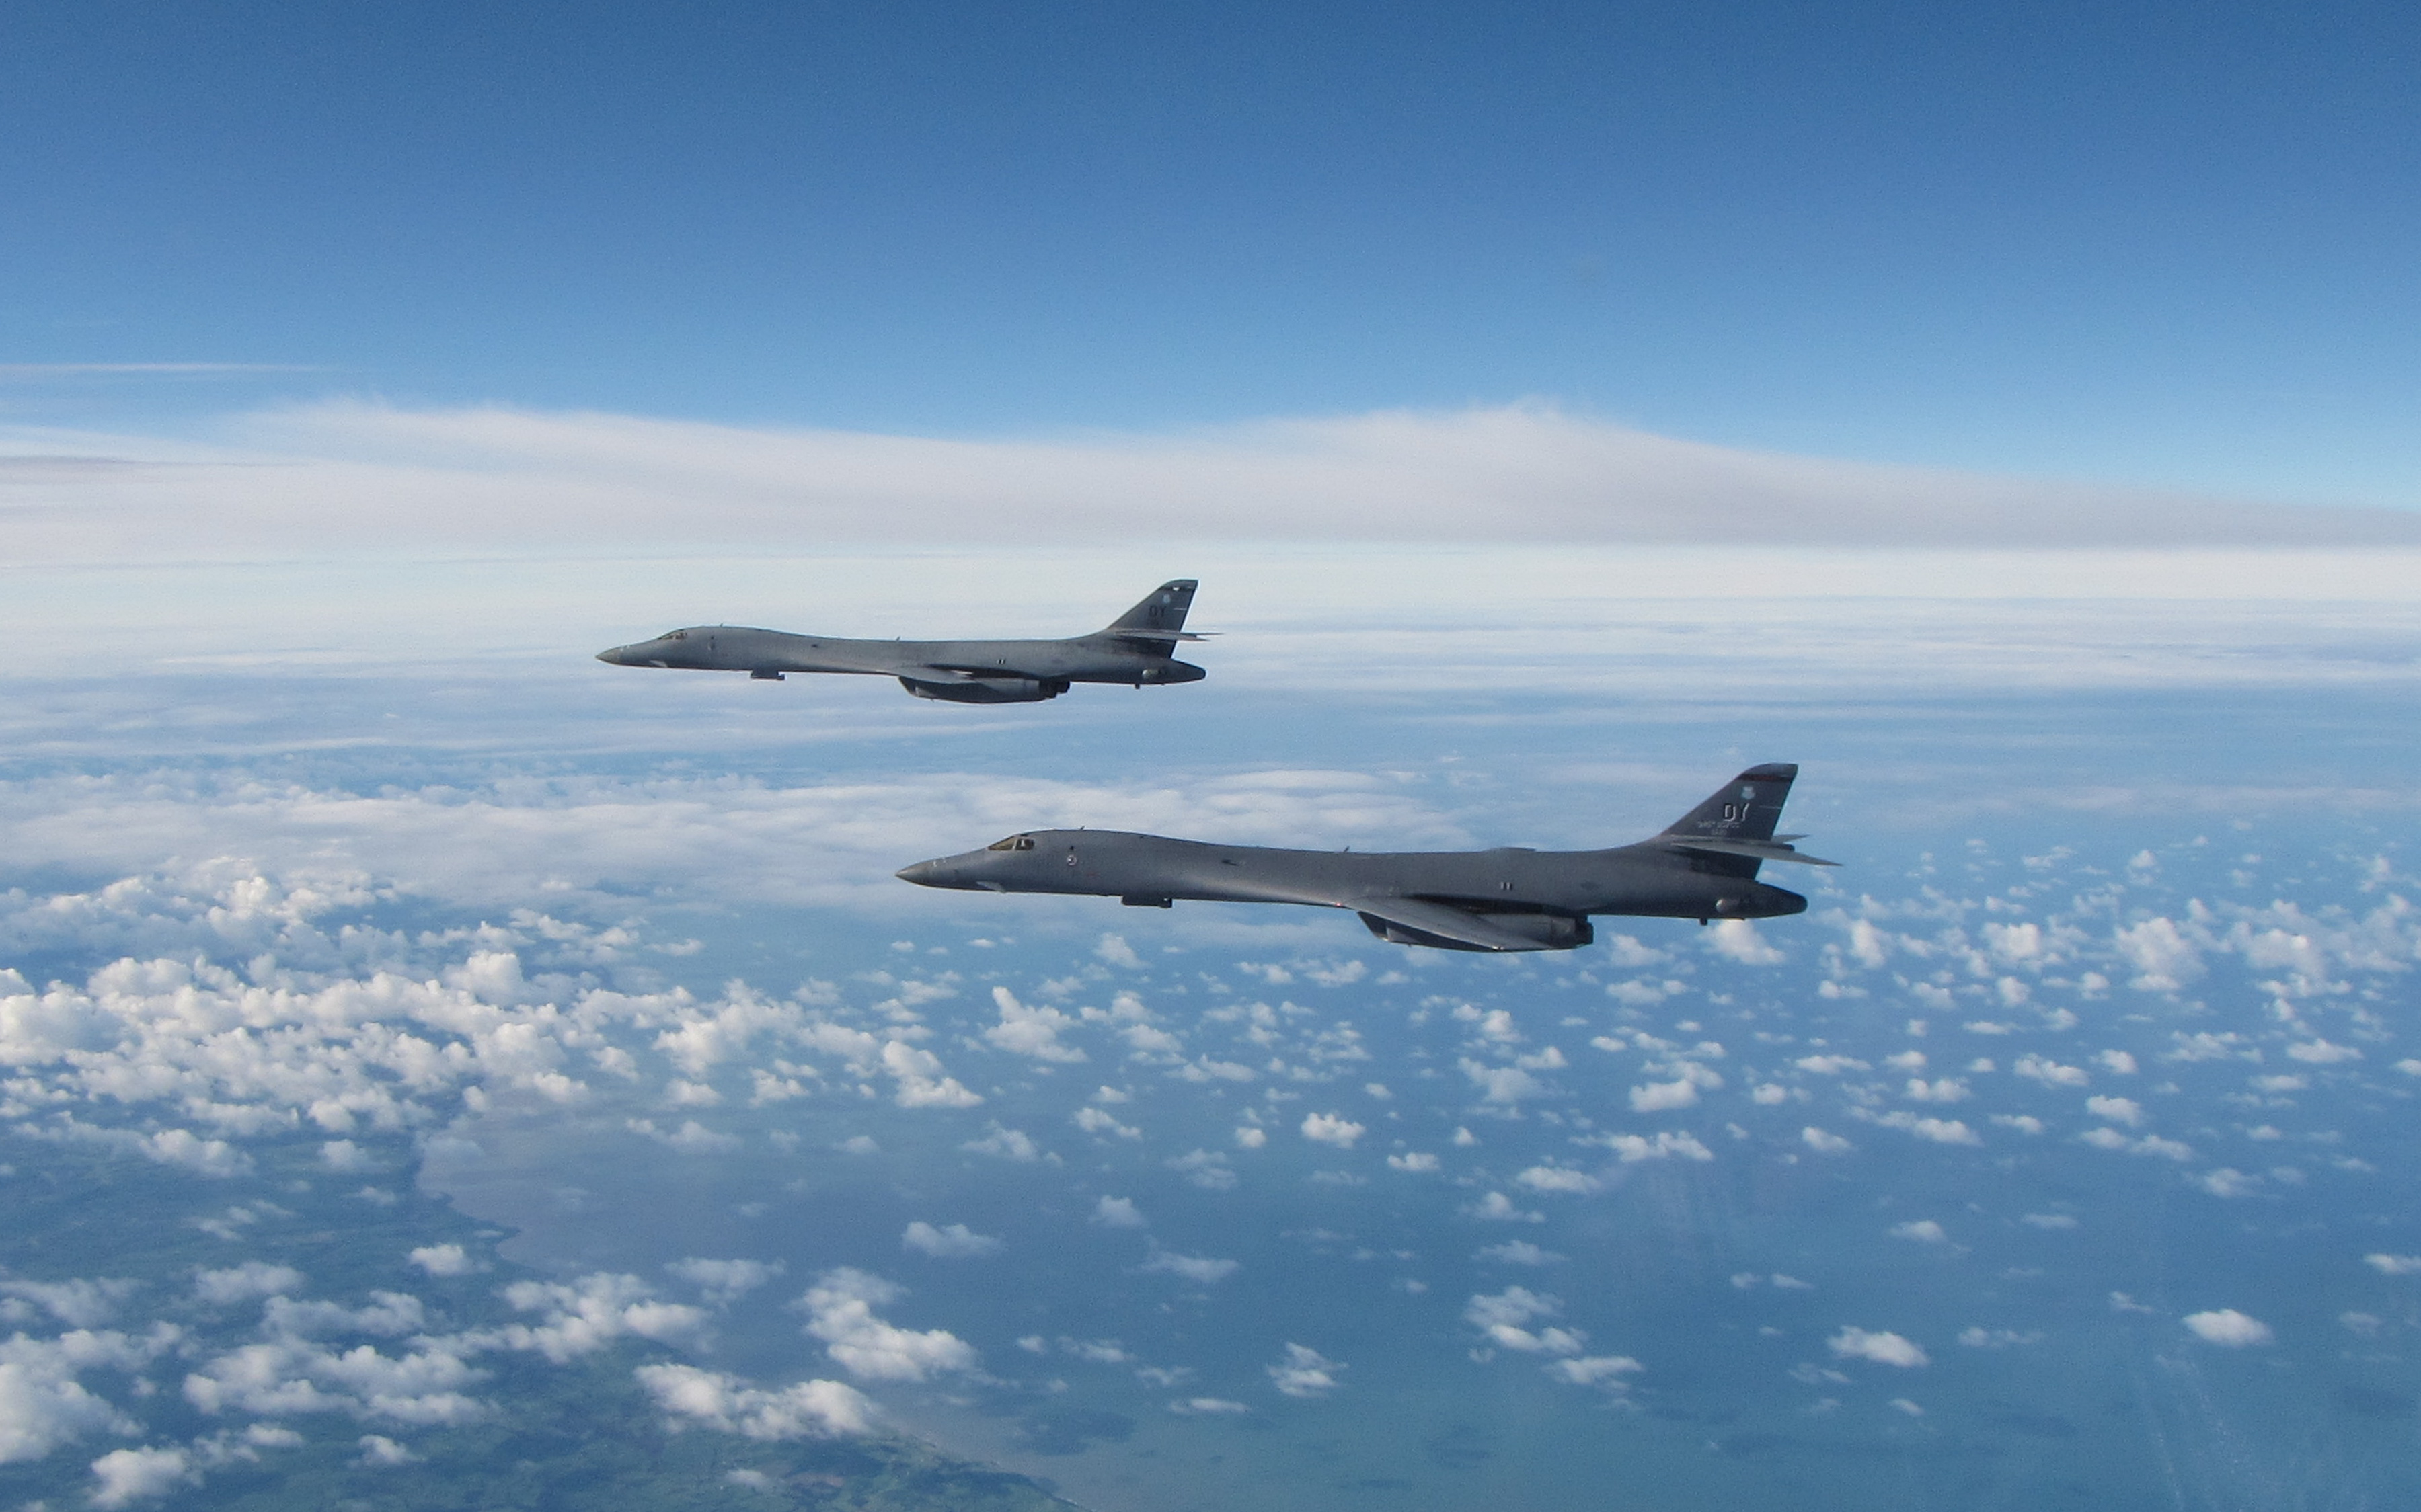 Two United States Air Force B-1 Bombers in flight.